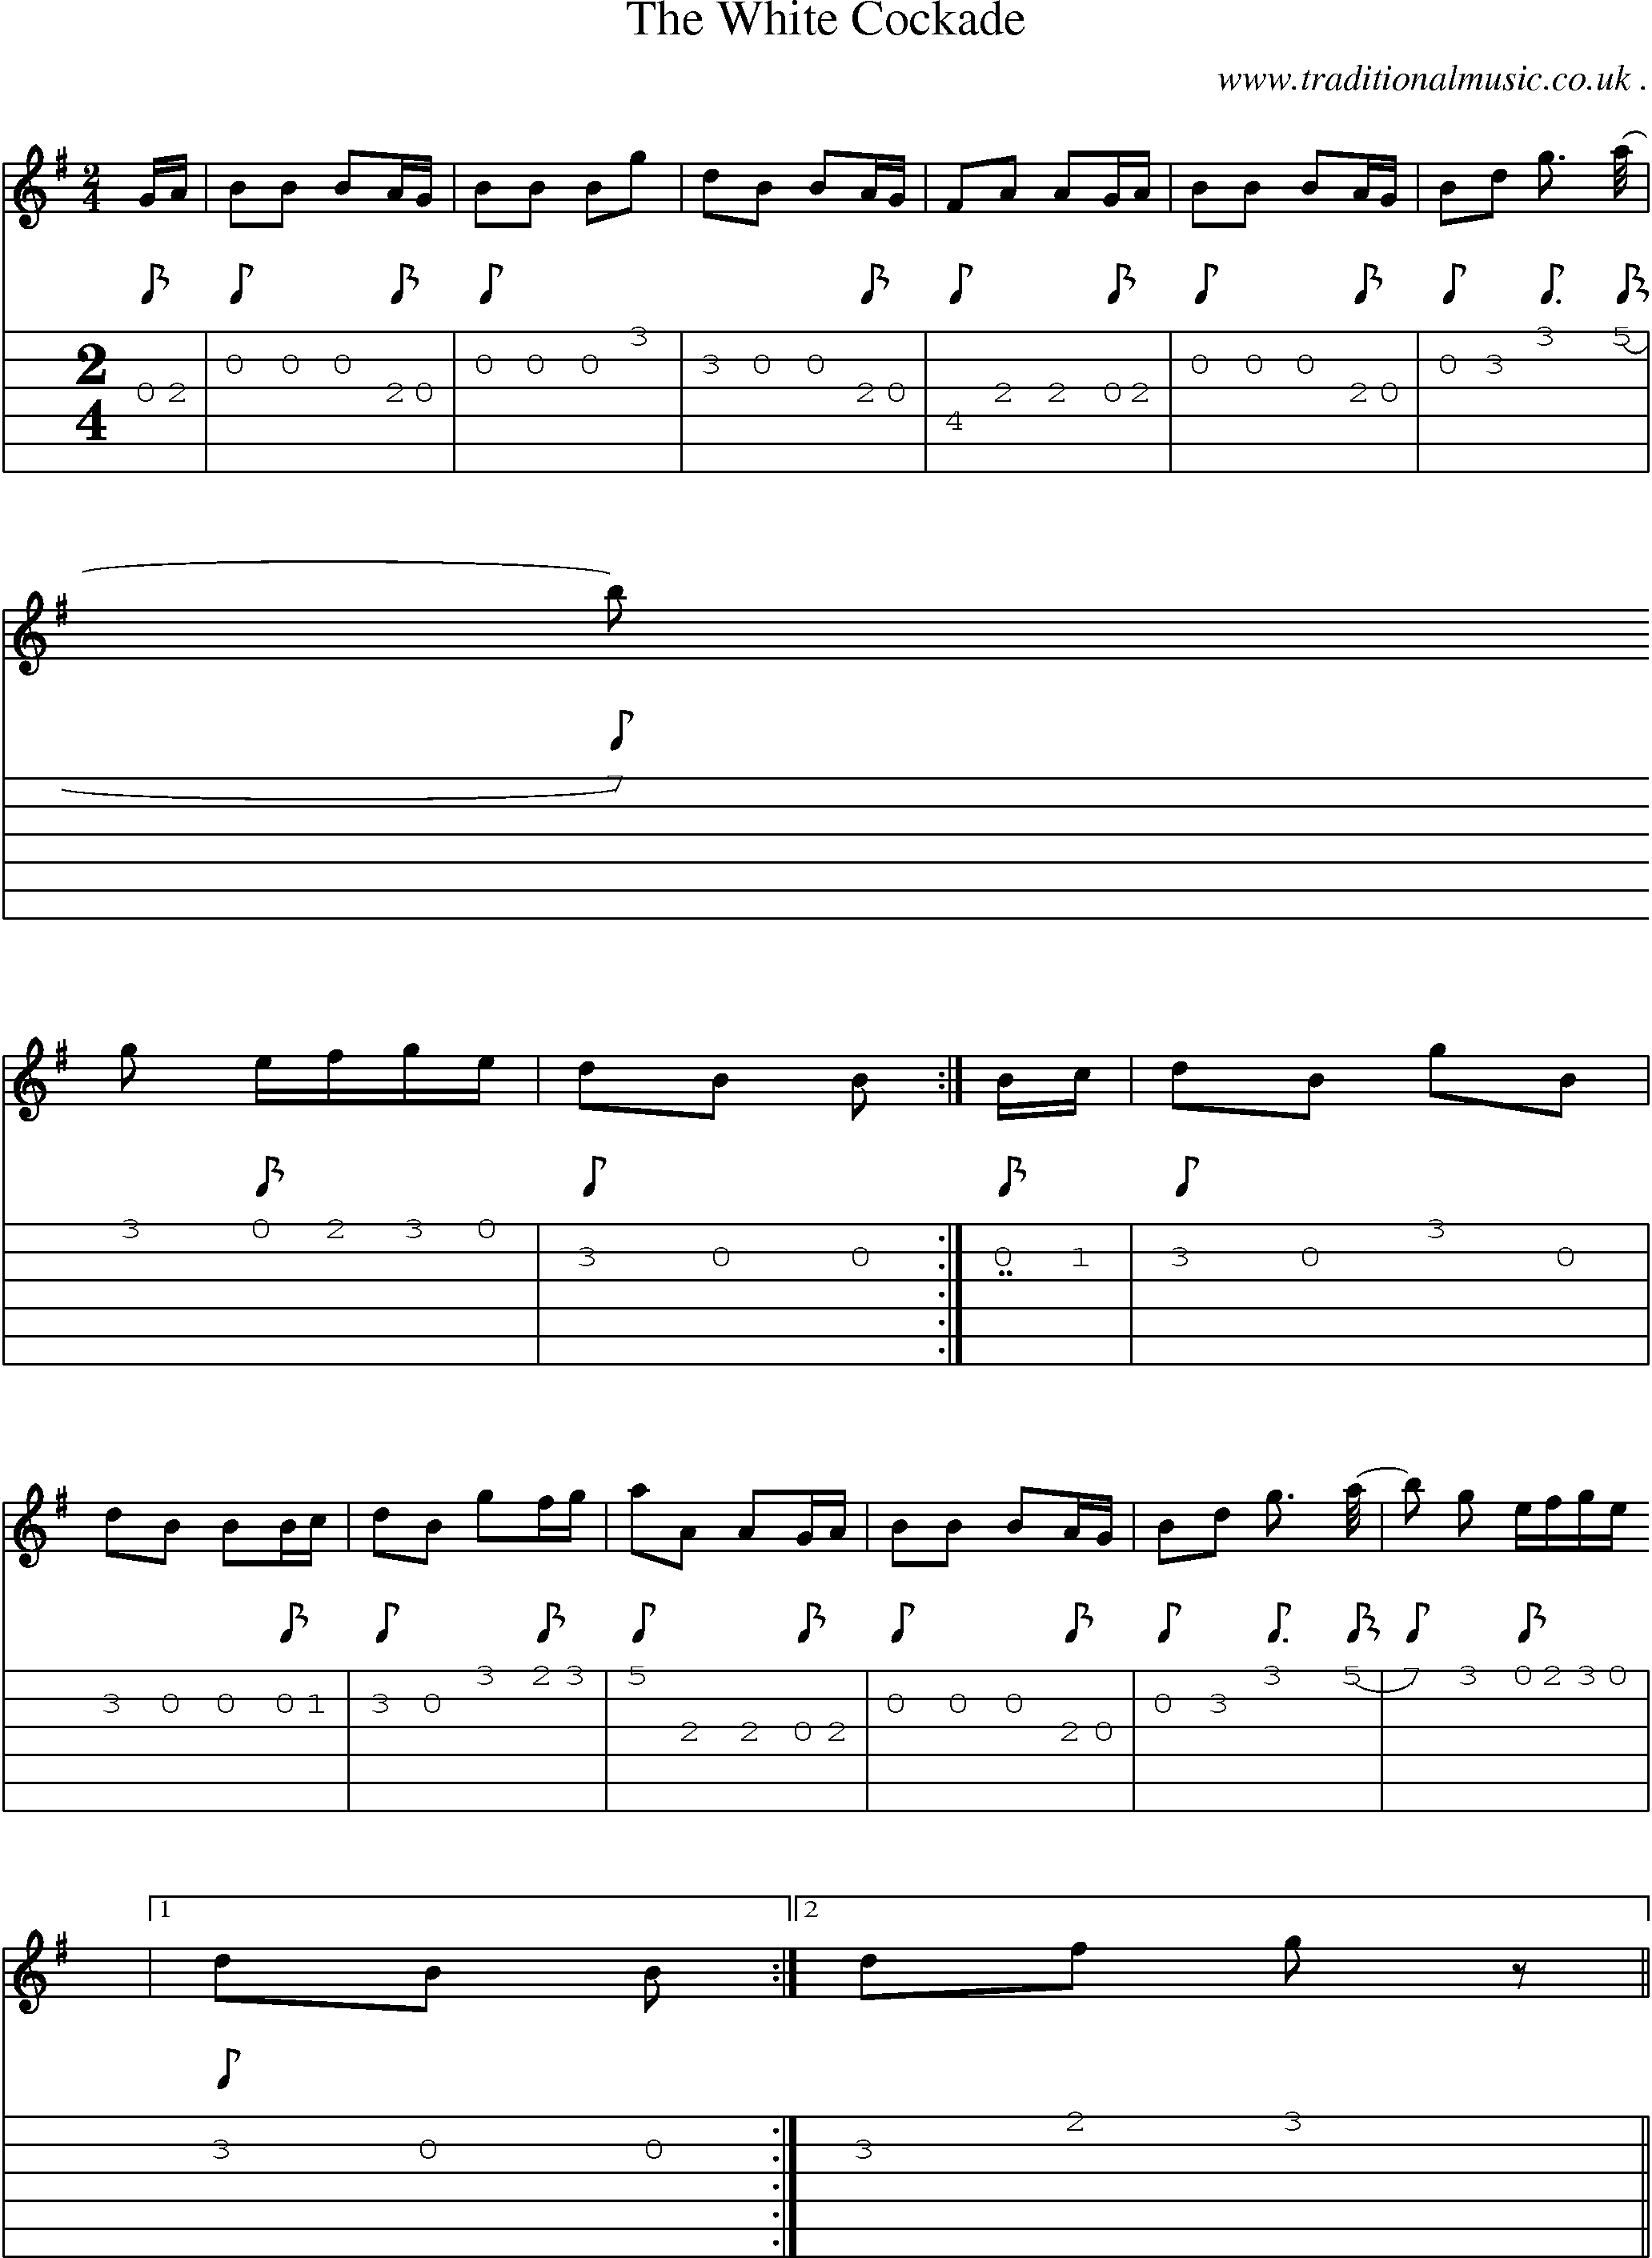 Music Score and Guitar Tabs for The White Cockade